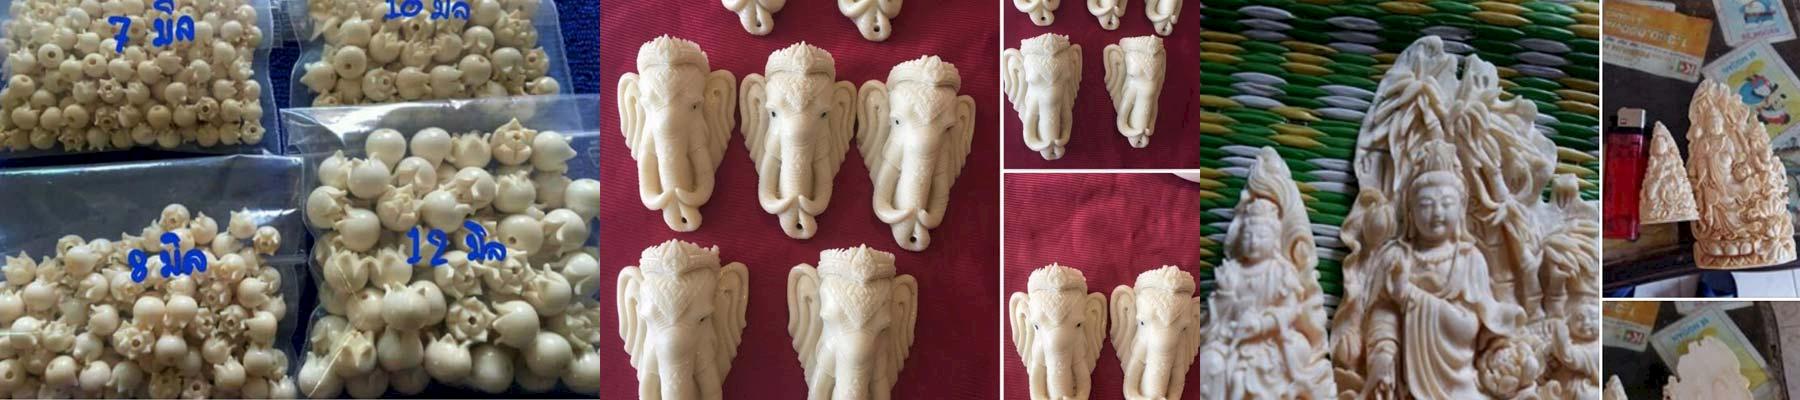 Ivory beads, Ganesha pendants said to be made from ivory powder, and ivory statues, all advertised on social media © TRAFFIC